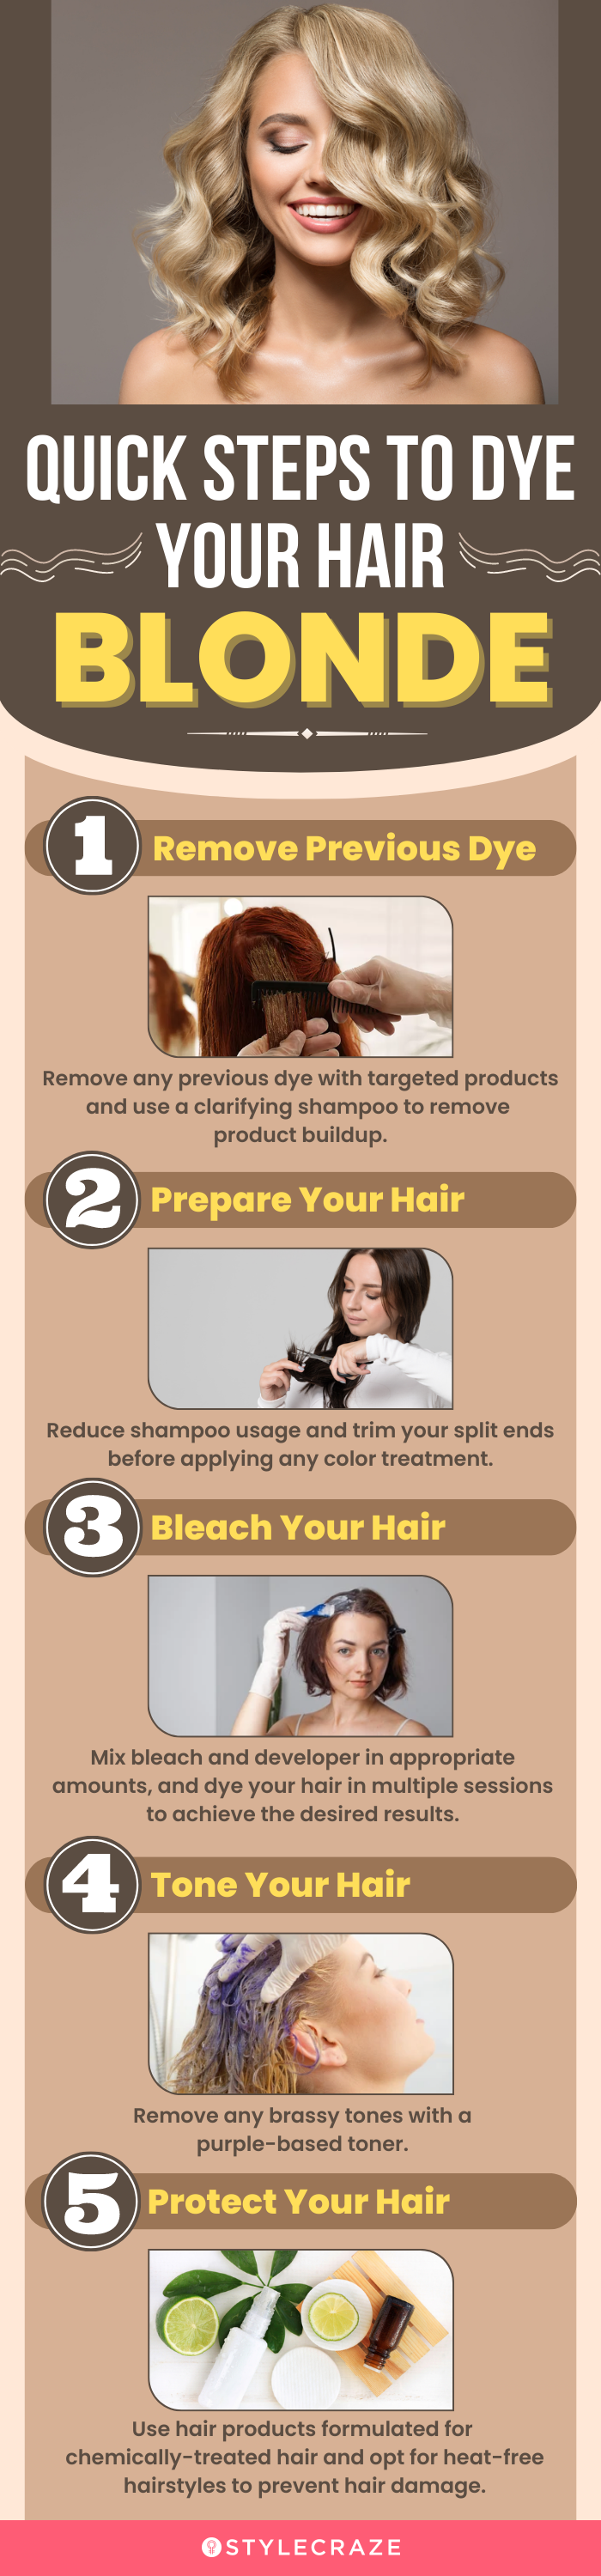 quick steps to dye your hair blonde (infographic)